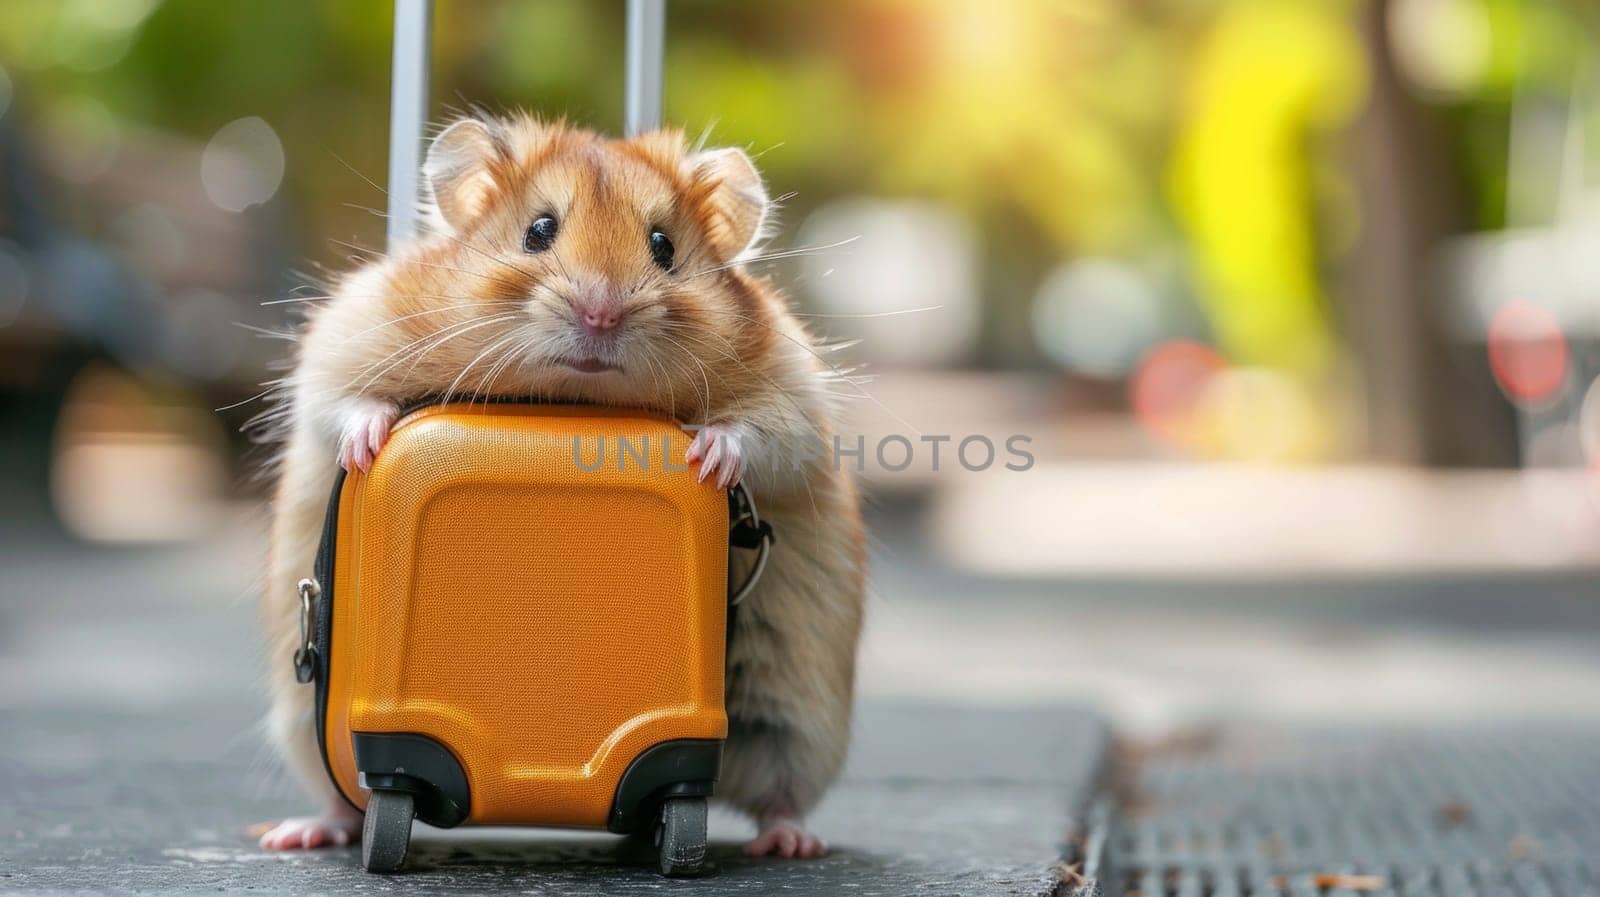 A hamster with a suitcase on its back and holding onto it, AI by starush